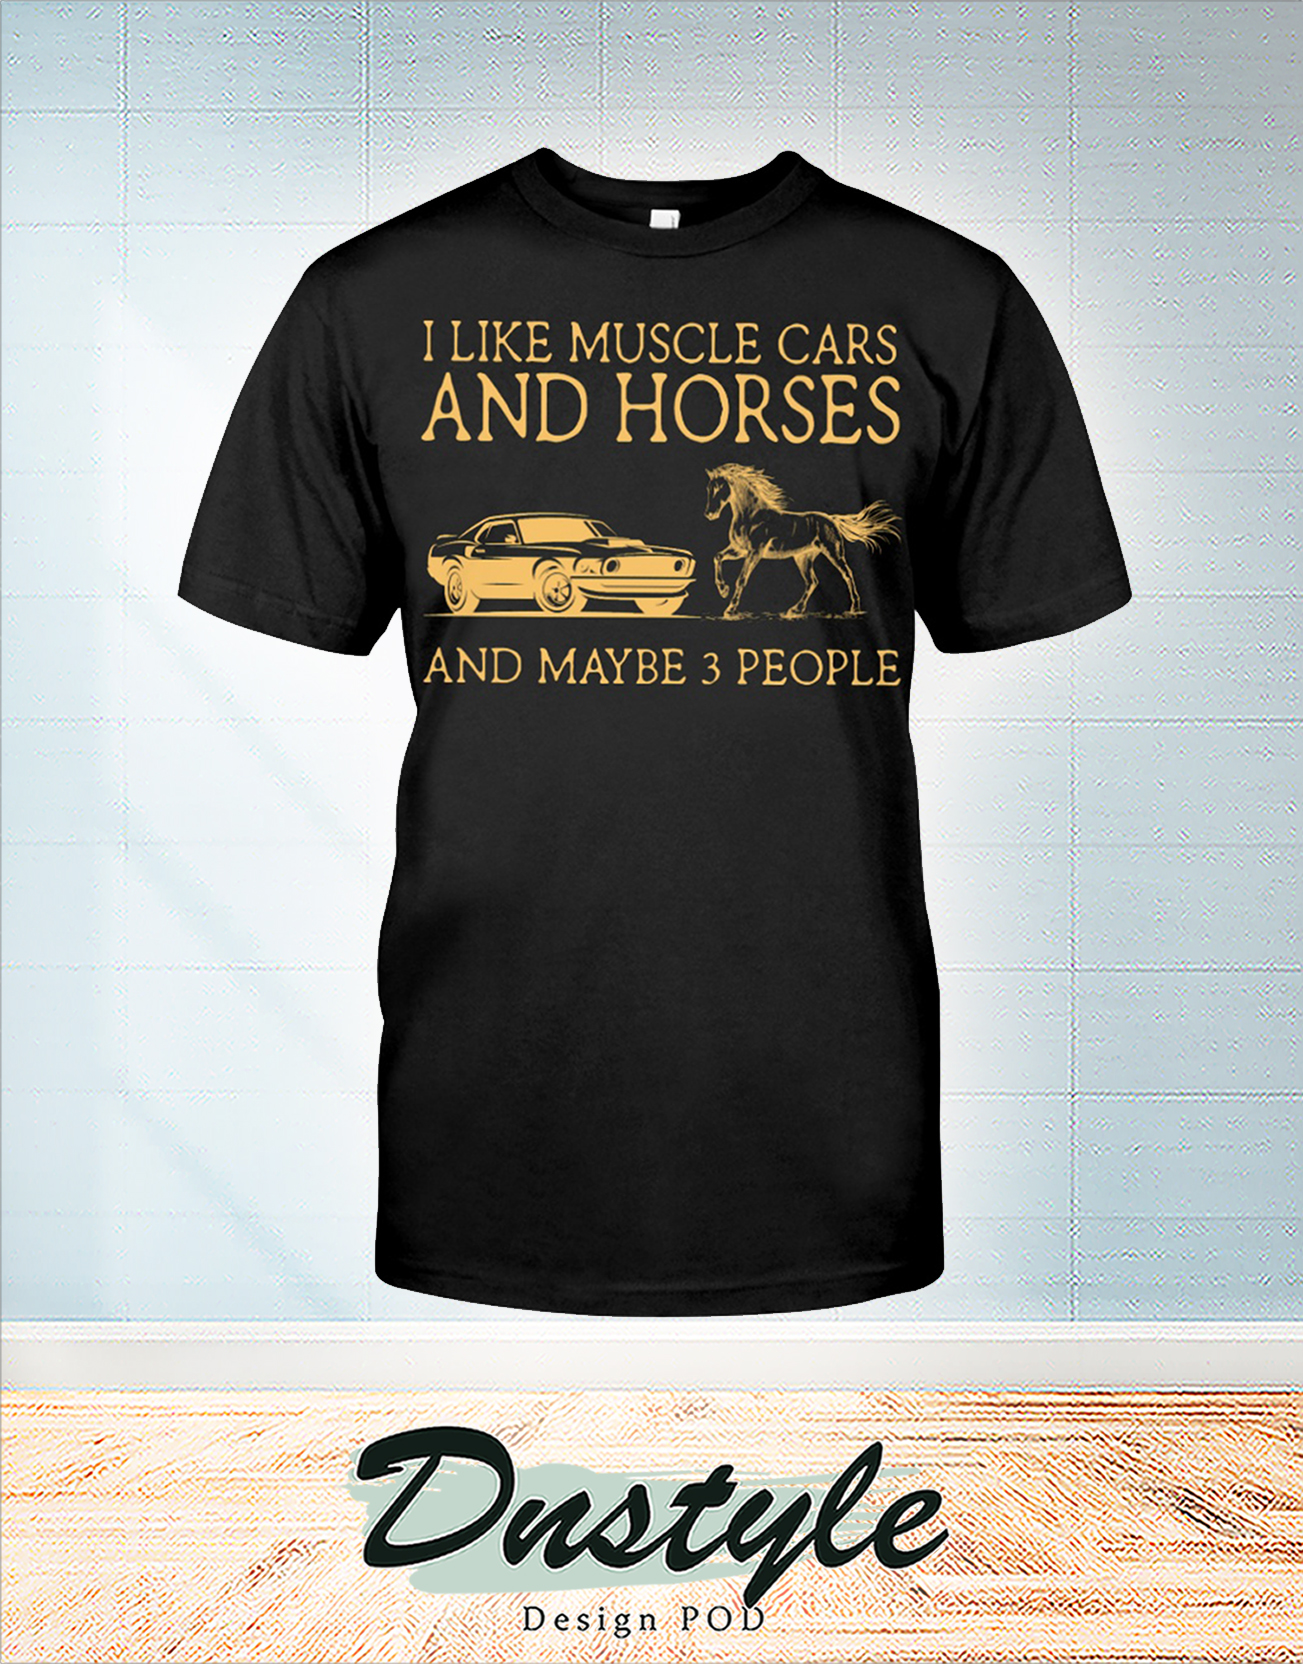 I like muscle cars and horses and maybe 3 people t-shirt